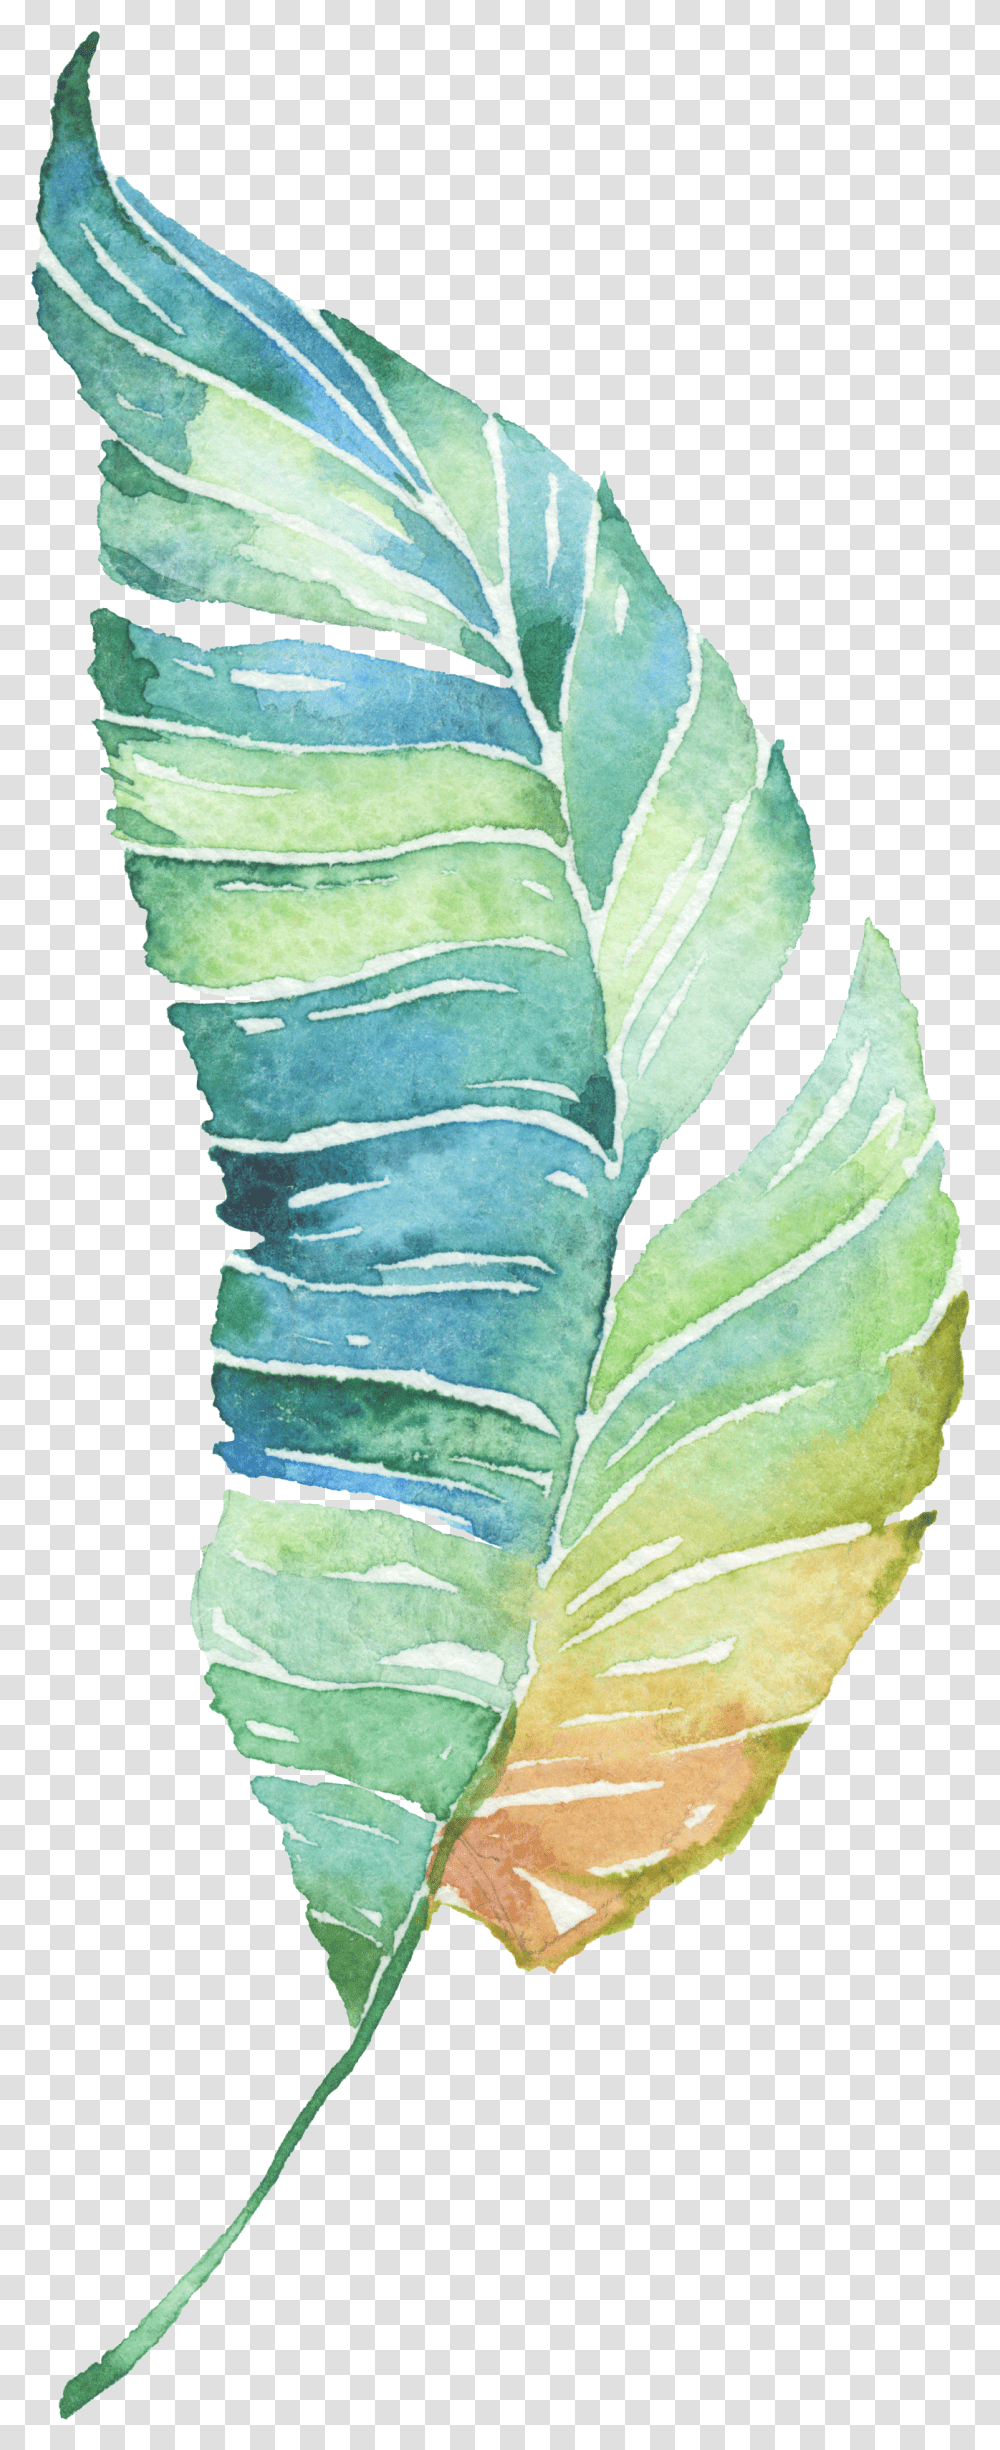 Download Water Painted Leaves Green Hd Image Free Green Water Painting Transparent Png